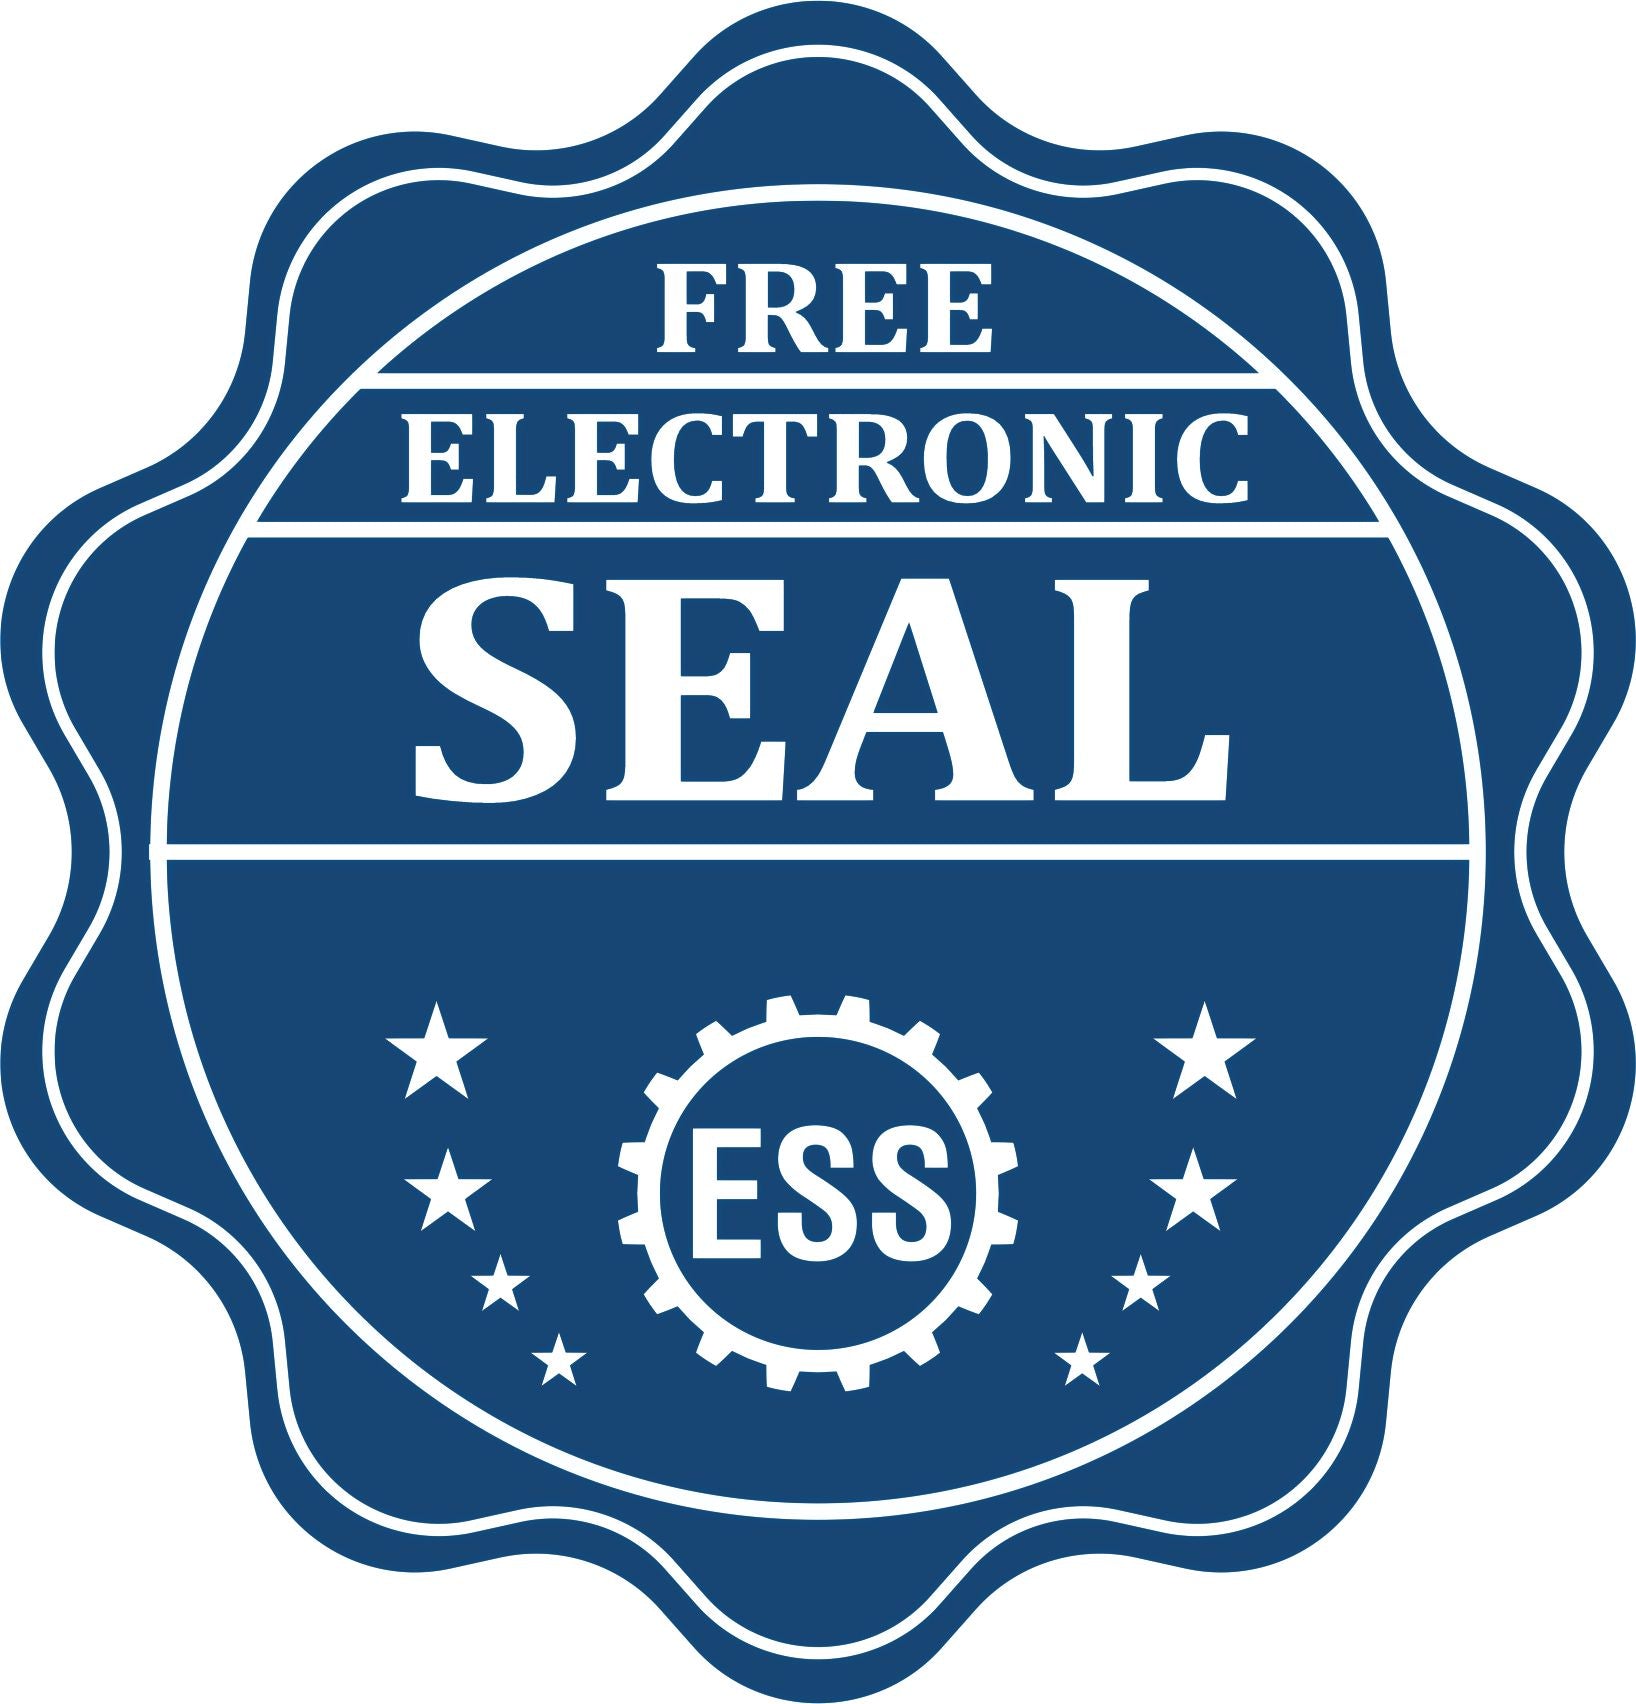 A badge showing a free electronic seal for the Heavy Duty Cast Iron Connecticut Geologist Seal Embosser with stars and the ESS gear on the emblem.